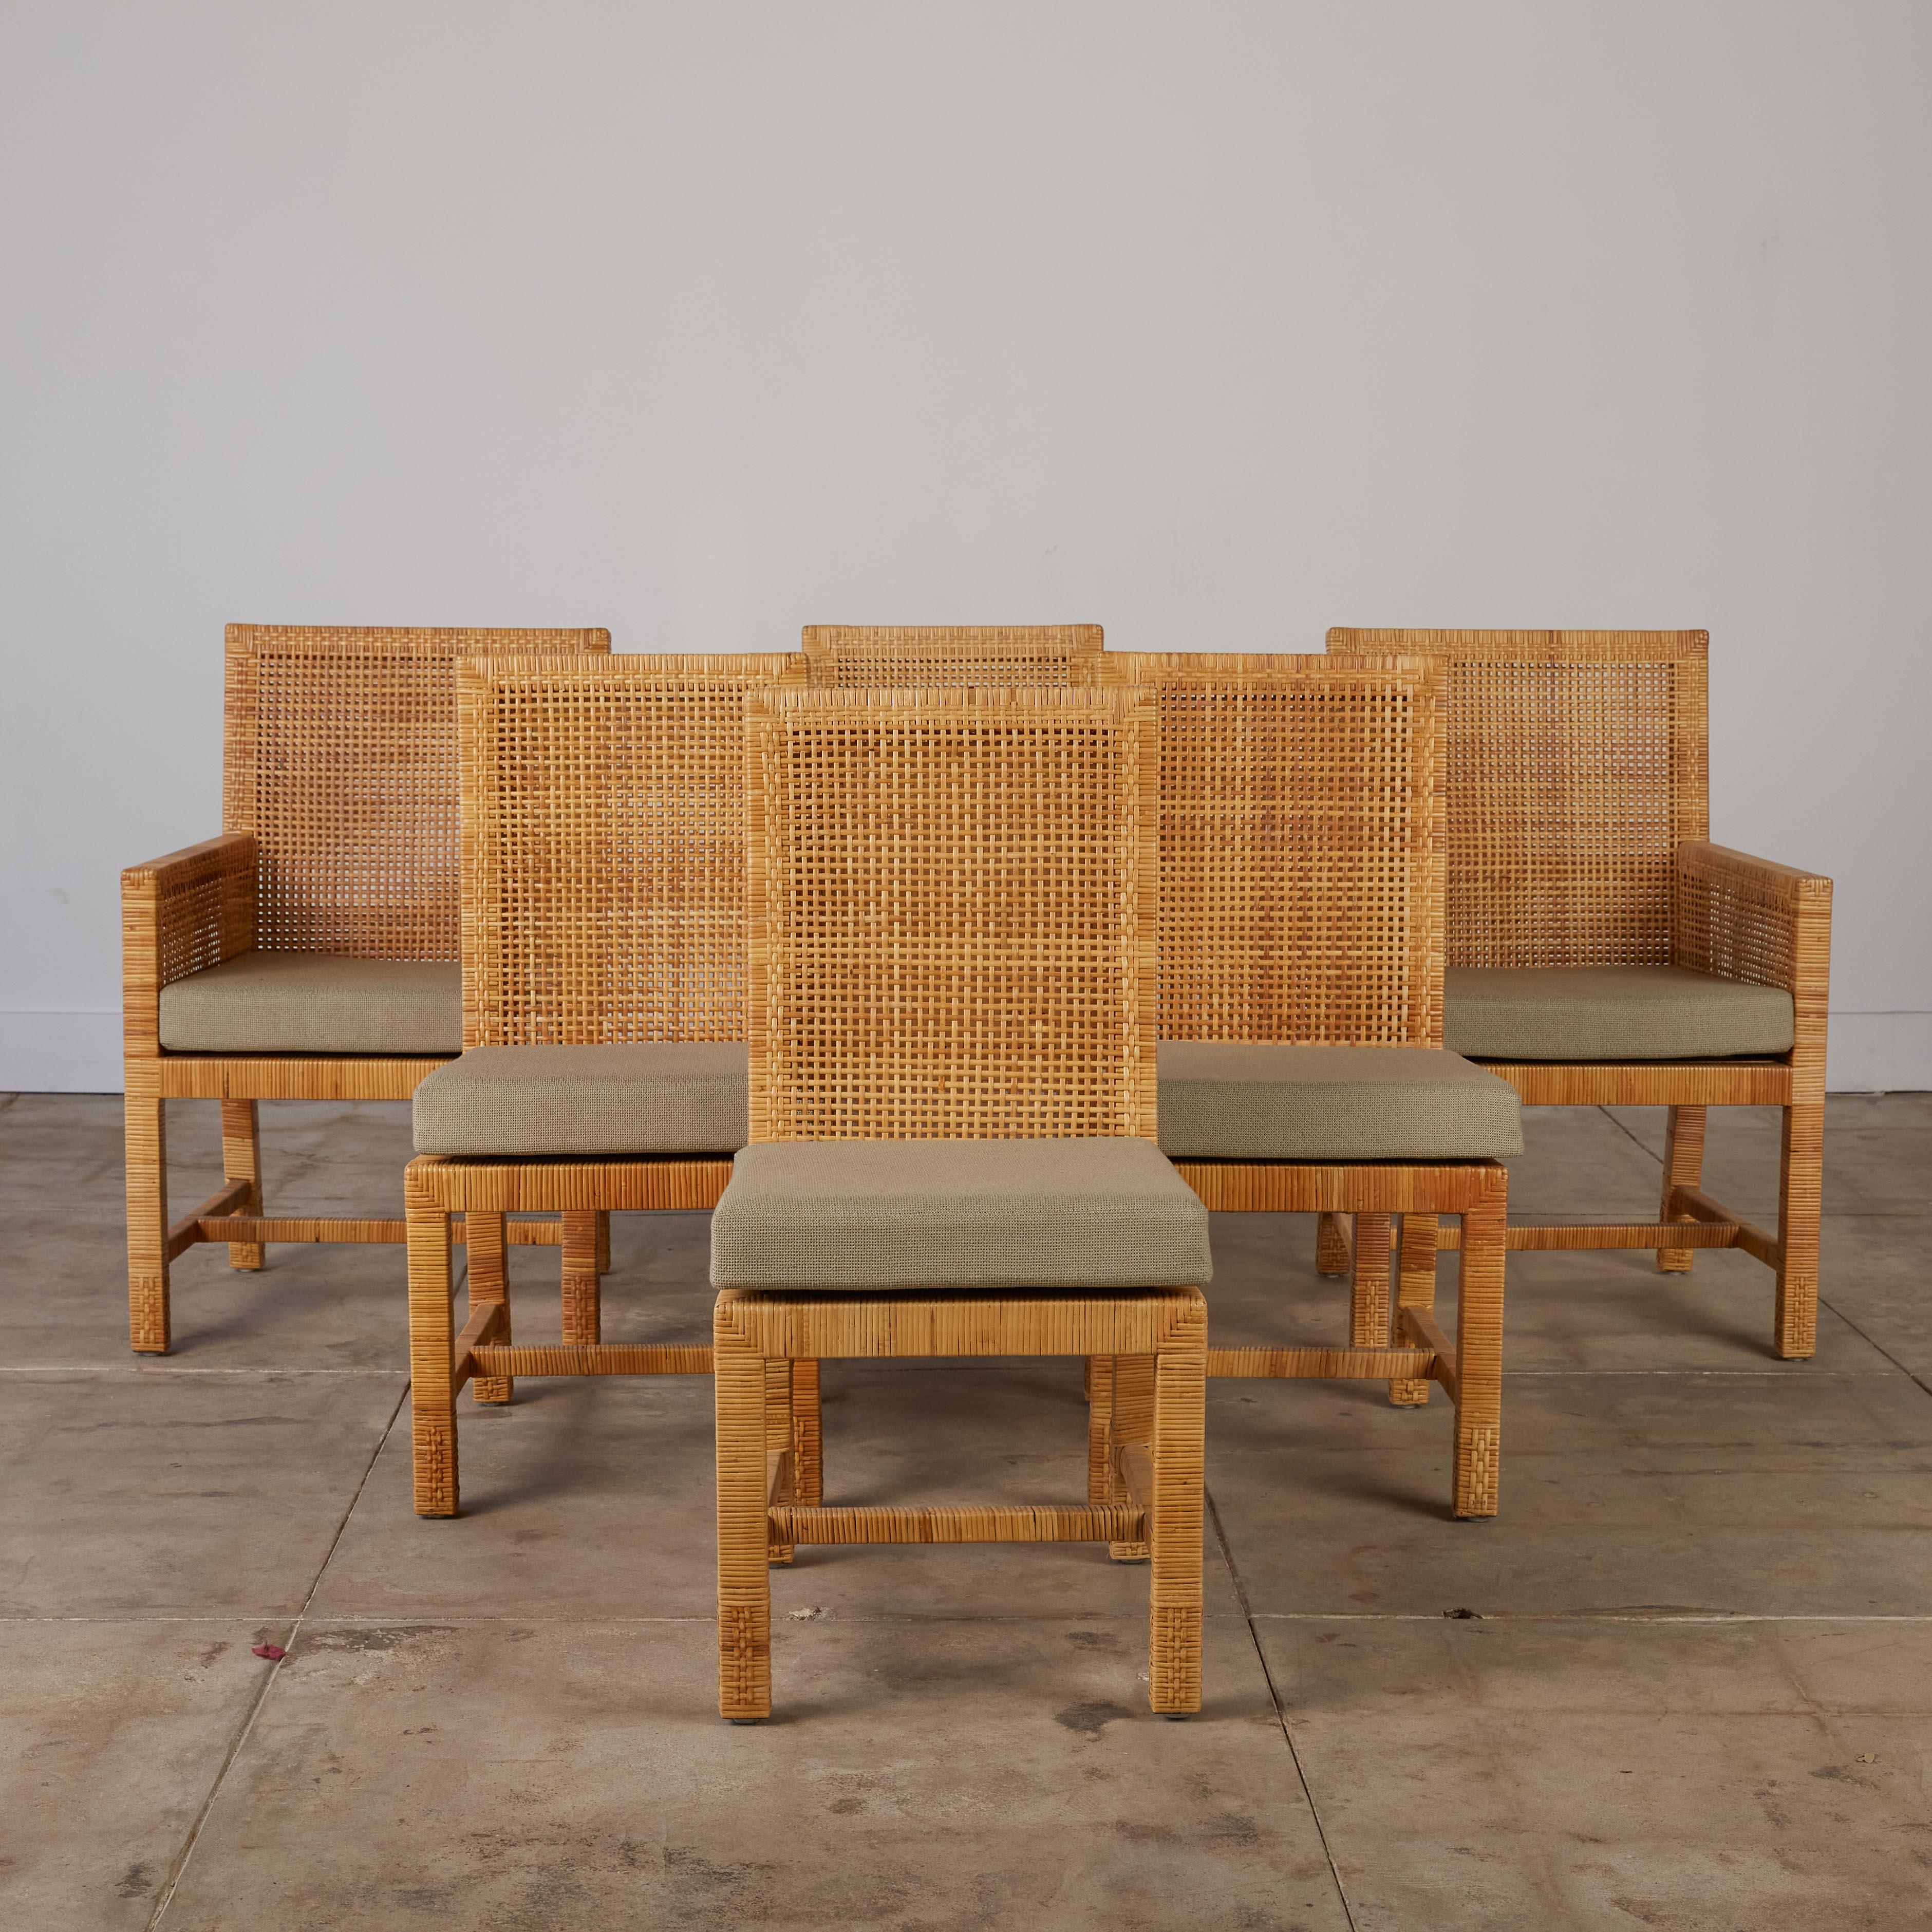 A set of six Parsons collection dining chairs by Danny Ho Fong for Tropi-cal with four side chairs and two captain chairs. Like the namesake Parsons table, the seating group features square legs set flush with the corners of the wooden chair frame.